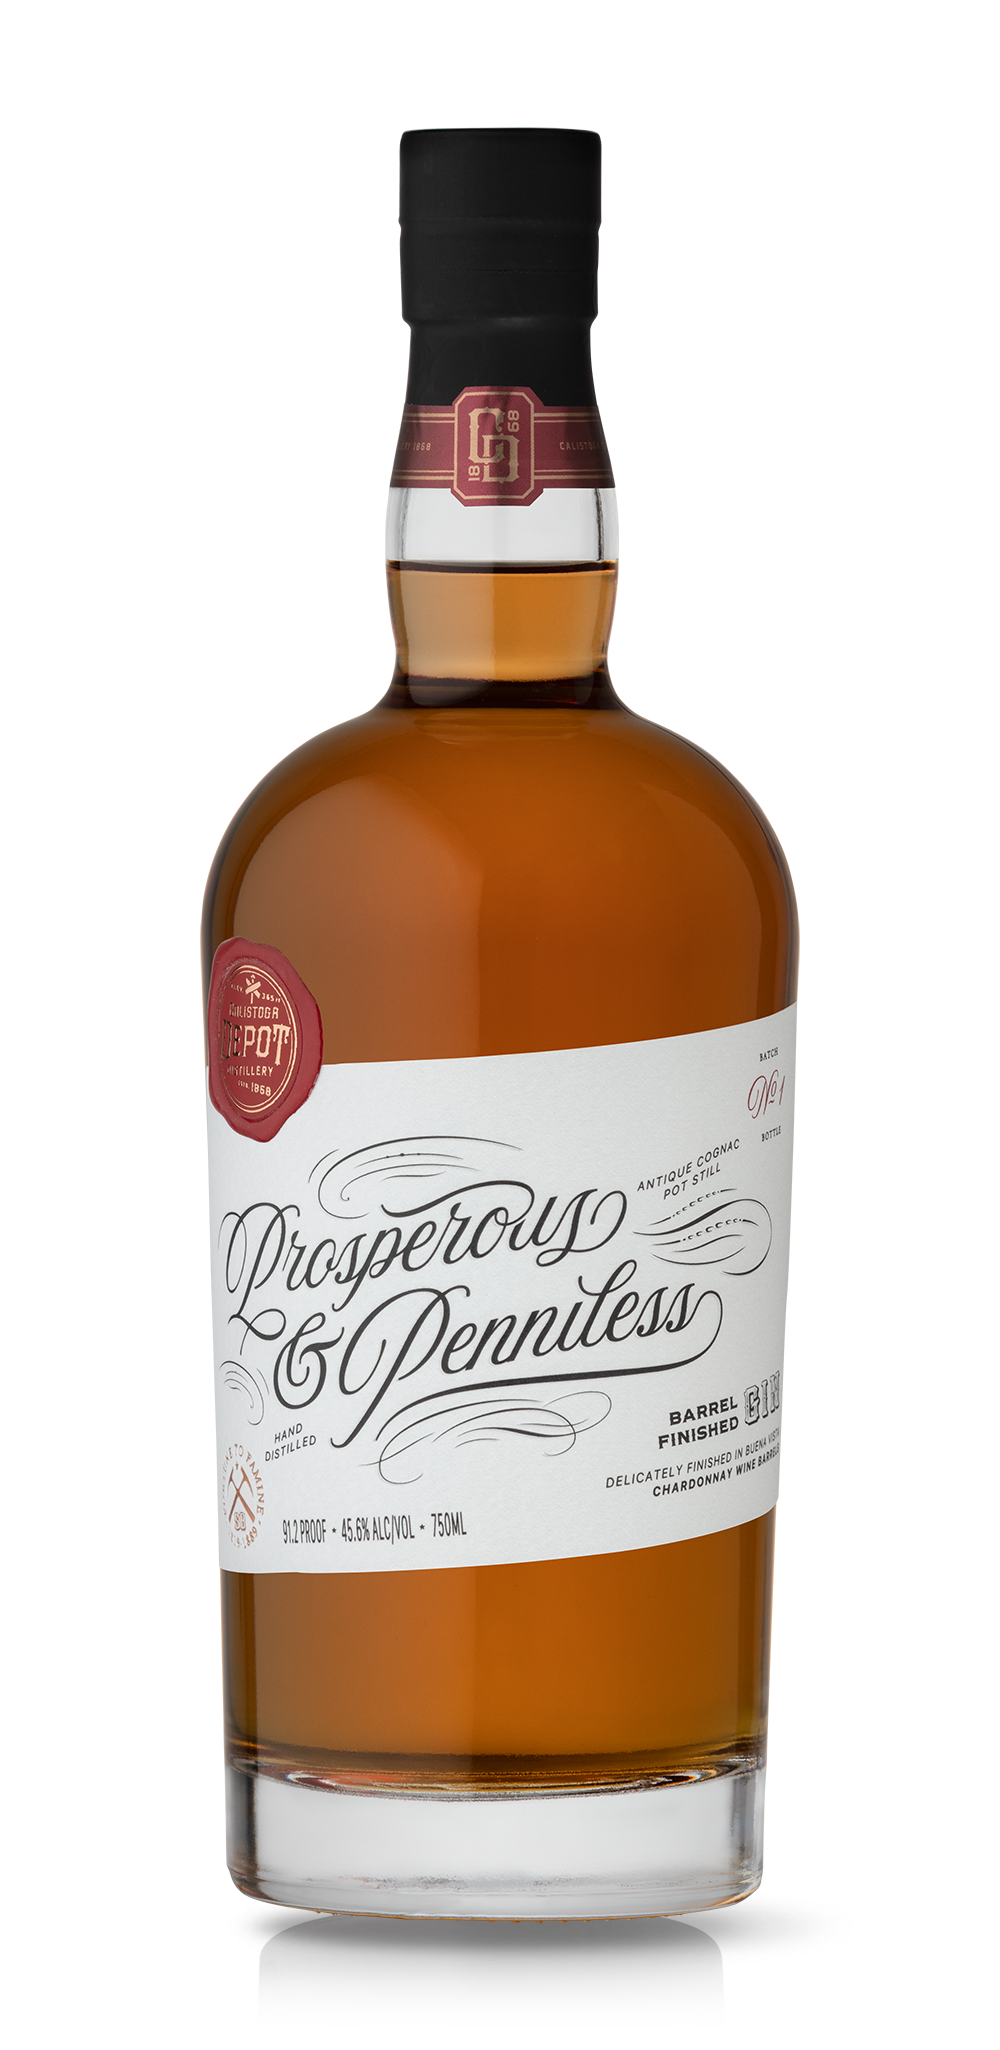 Prosperous & Penniless Barrel Finished Gin from the Calistoga Depot Spirits